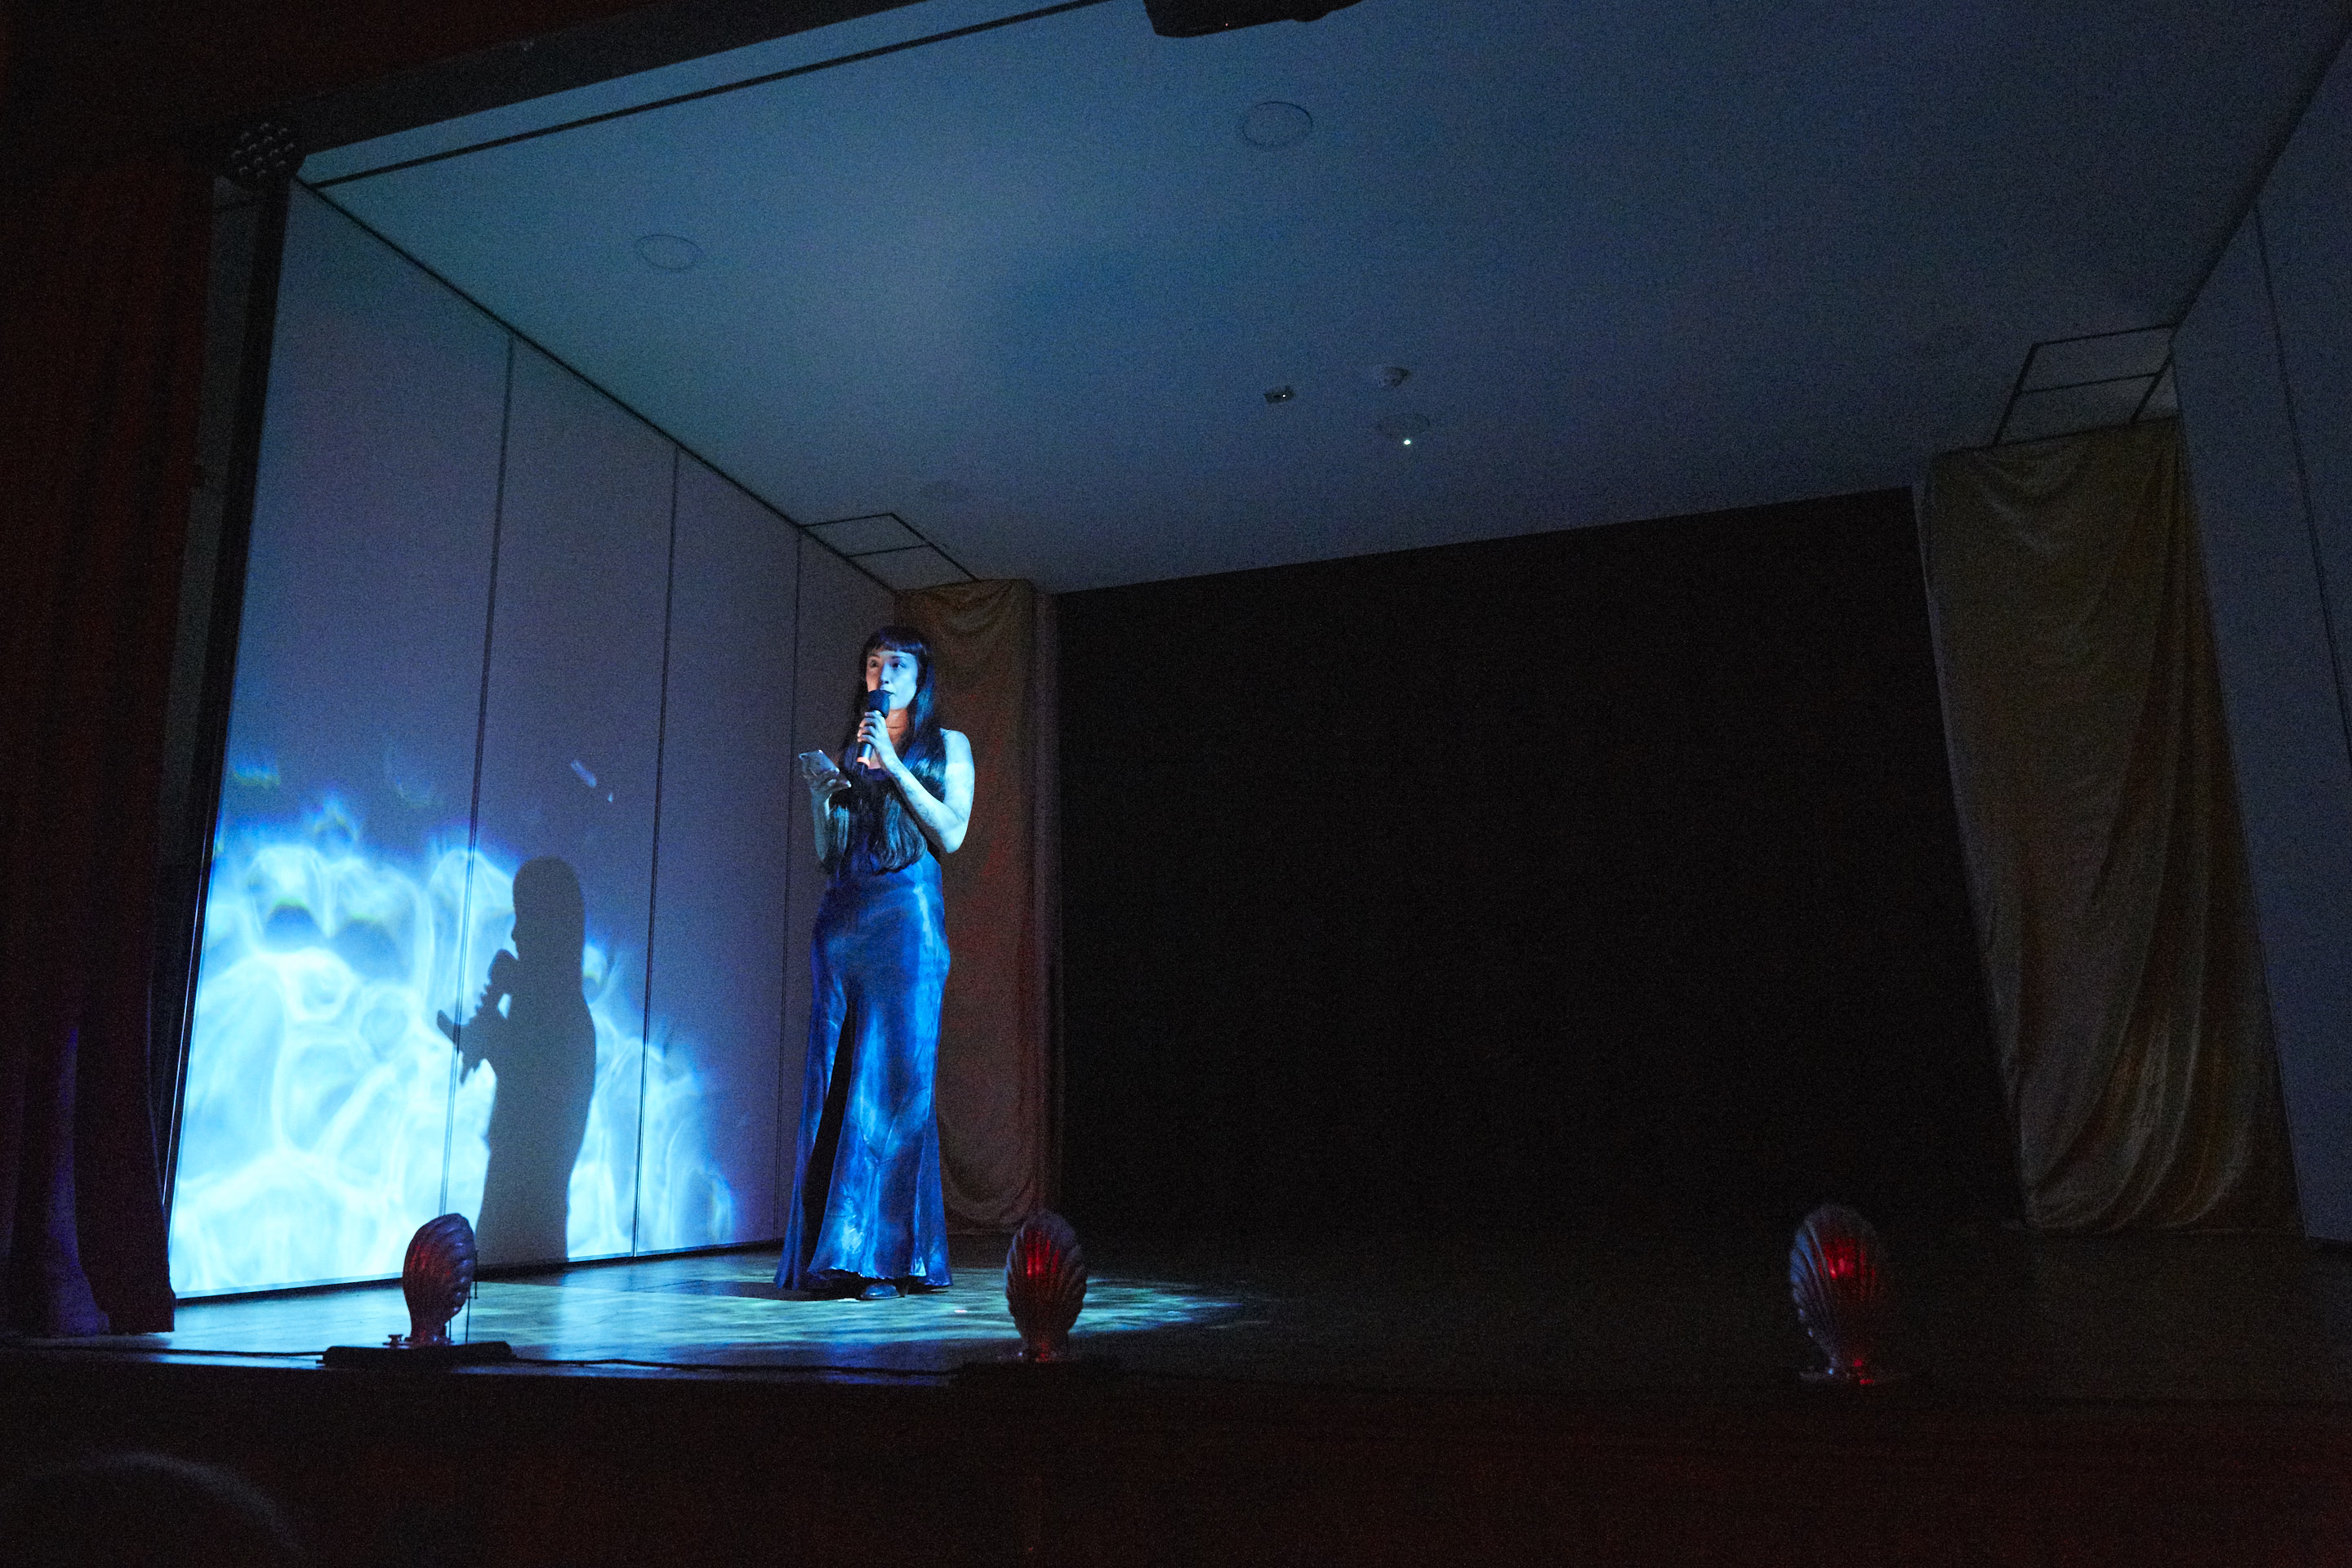 Artist reads a text into a microphone, lit by a rippling blue light with an effect similar to water.